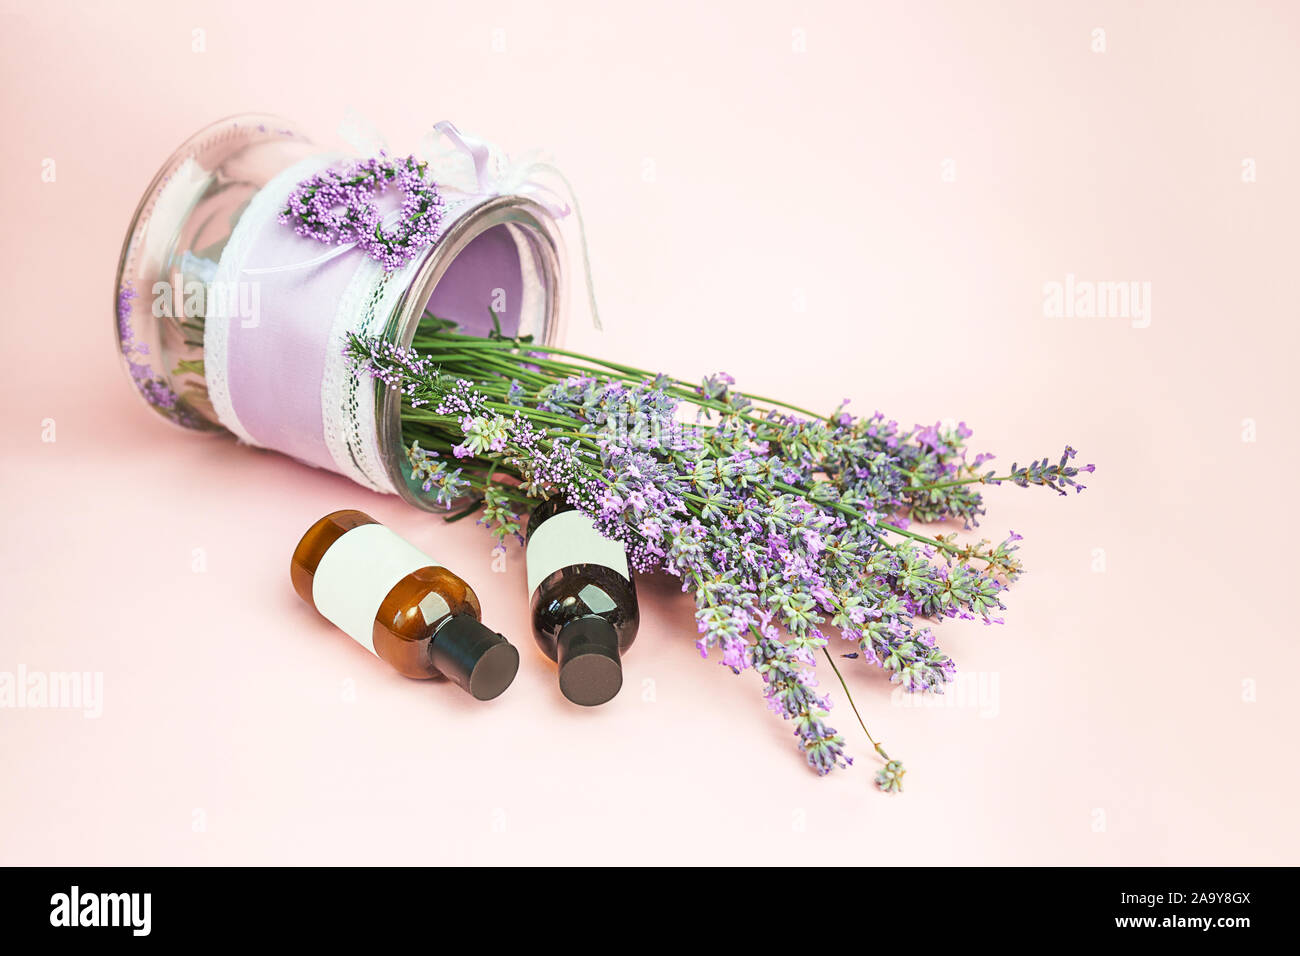 Natural cosmetics. Fresh lavender flowers and bottles essential oil or serum on pastel pink background. Alternative home medicine. Close-up, vintage style. Stock Photo